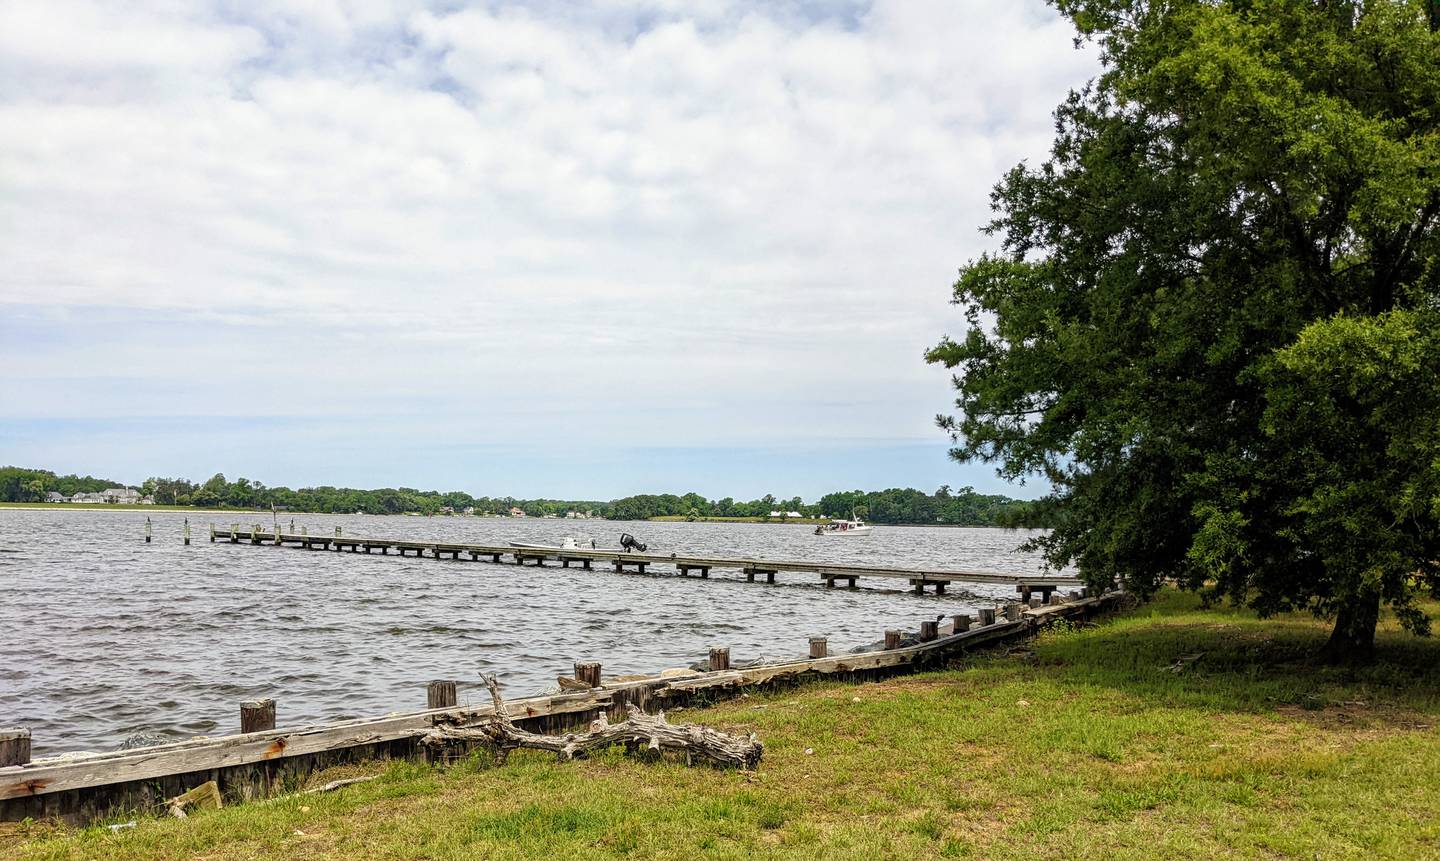 The Chesapeake Bay Foundation has posted a call for letters of interest in taking over Holly Beach Farm, a 300 acre nature preserve just outside Annapolis.